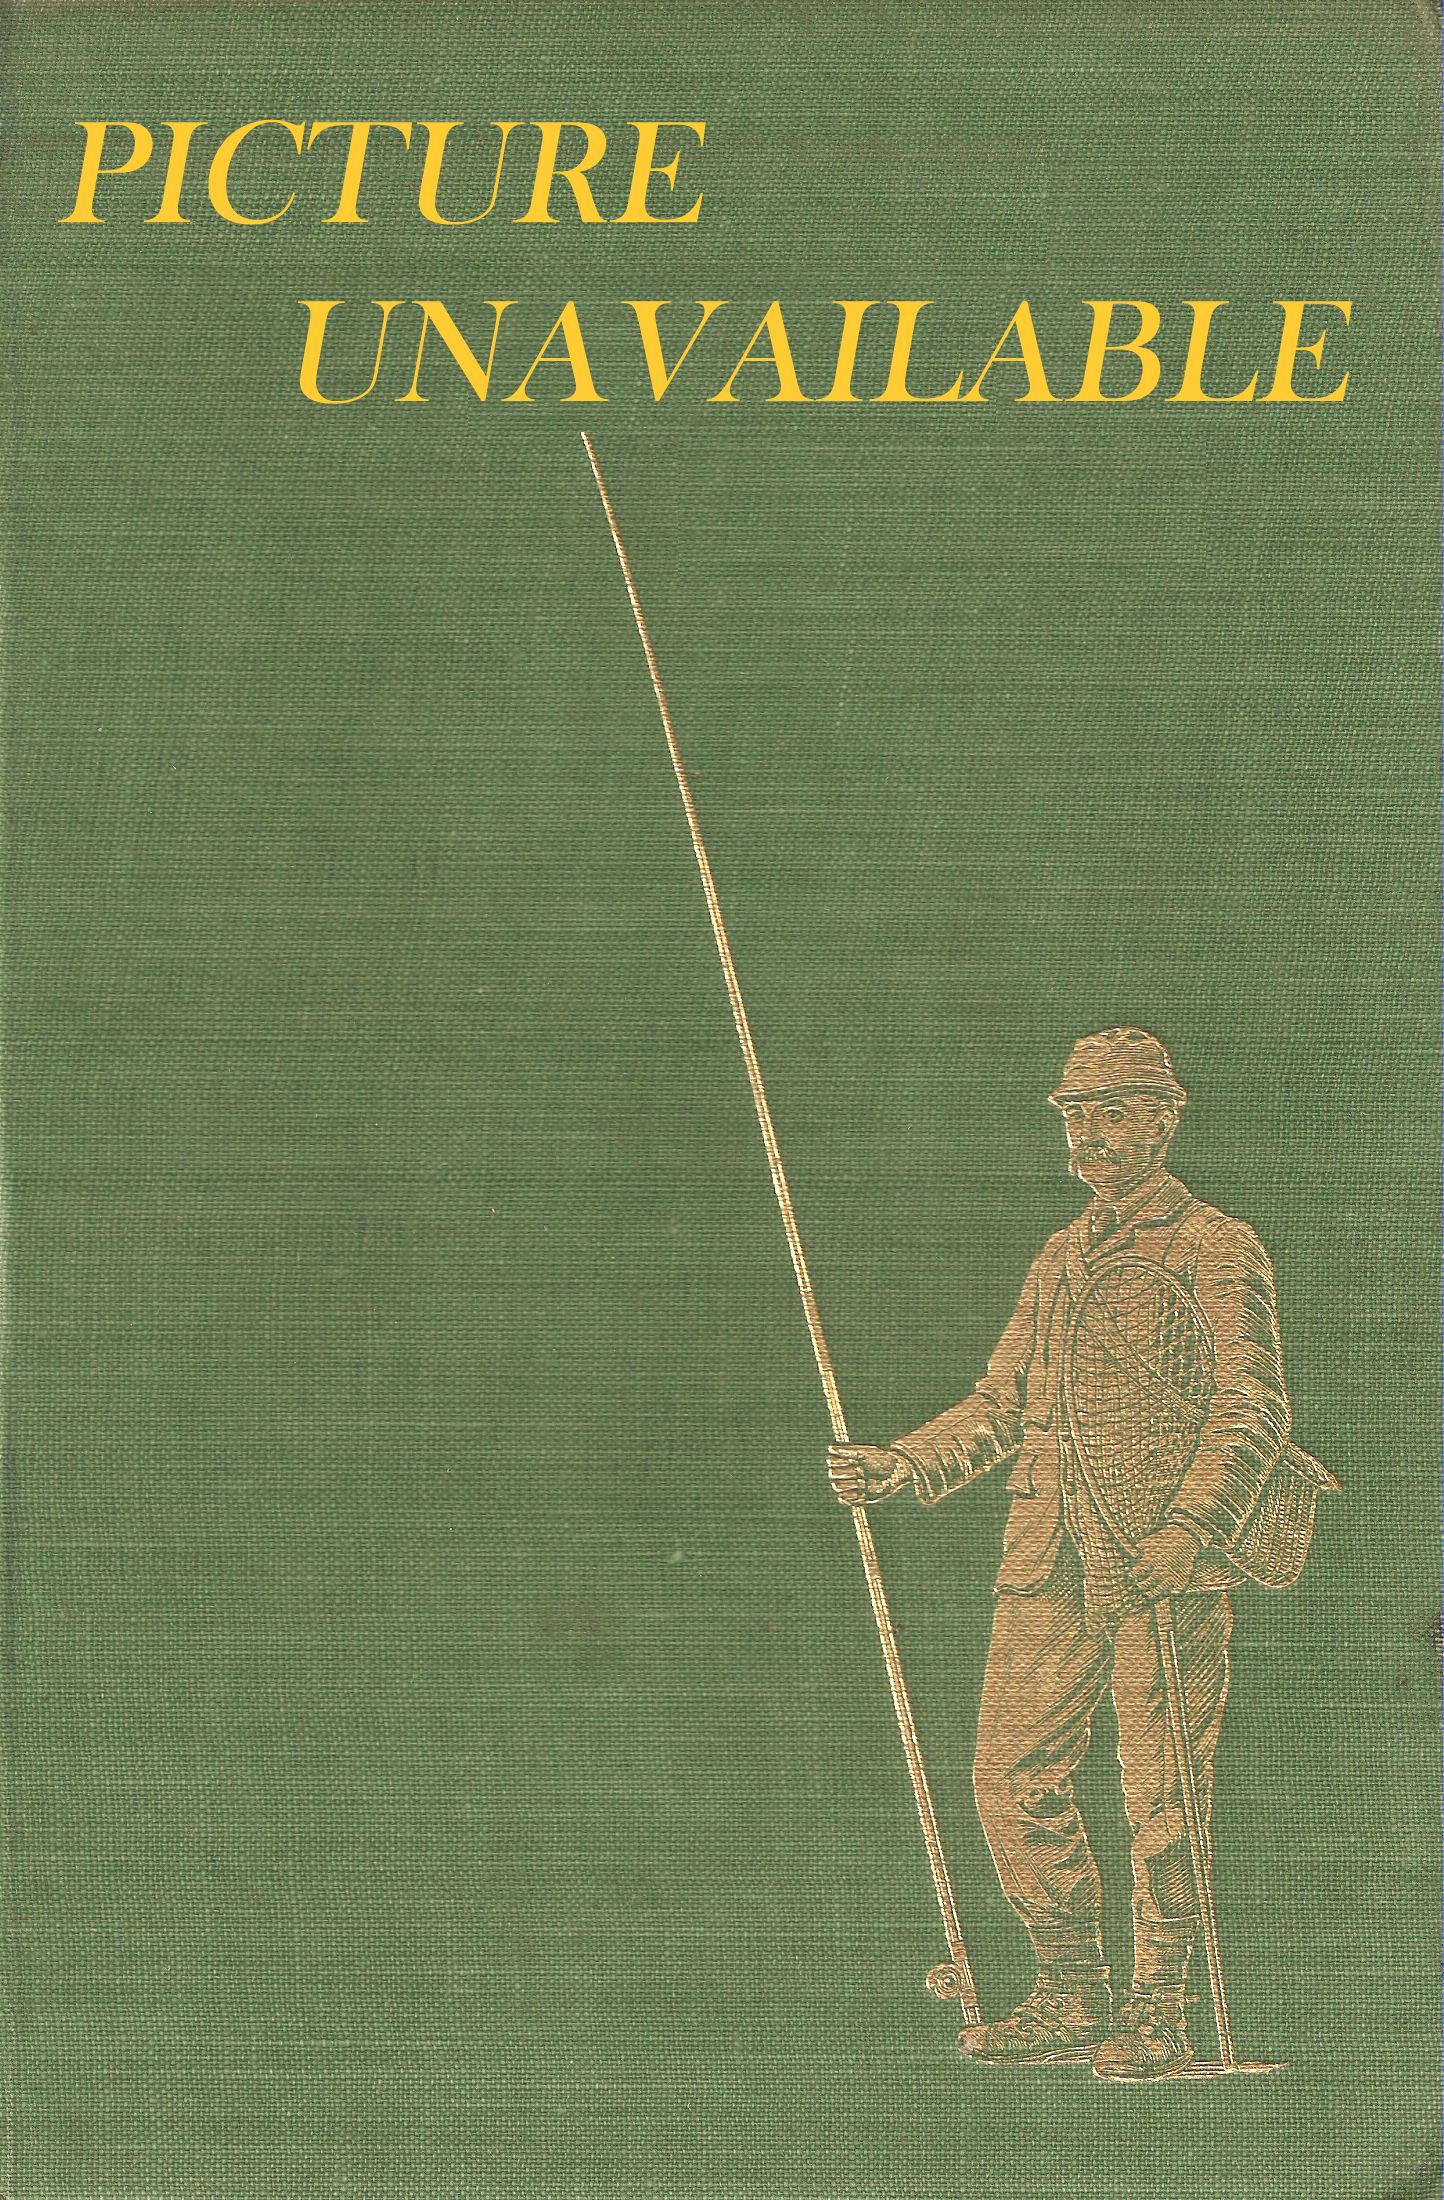 FISHING FOR PLEASURE AND CATCHING IT. By E. Marston, F.R.G.S. (The Amateur  Angler) and two chapters on angling in North Wales by R.B. Marston.